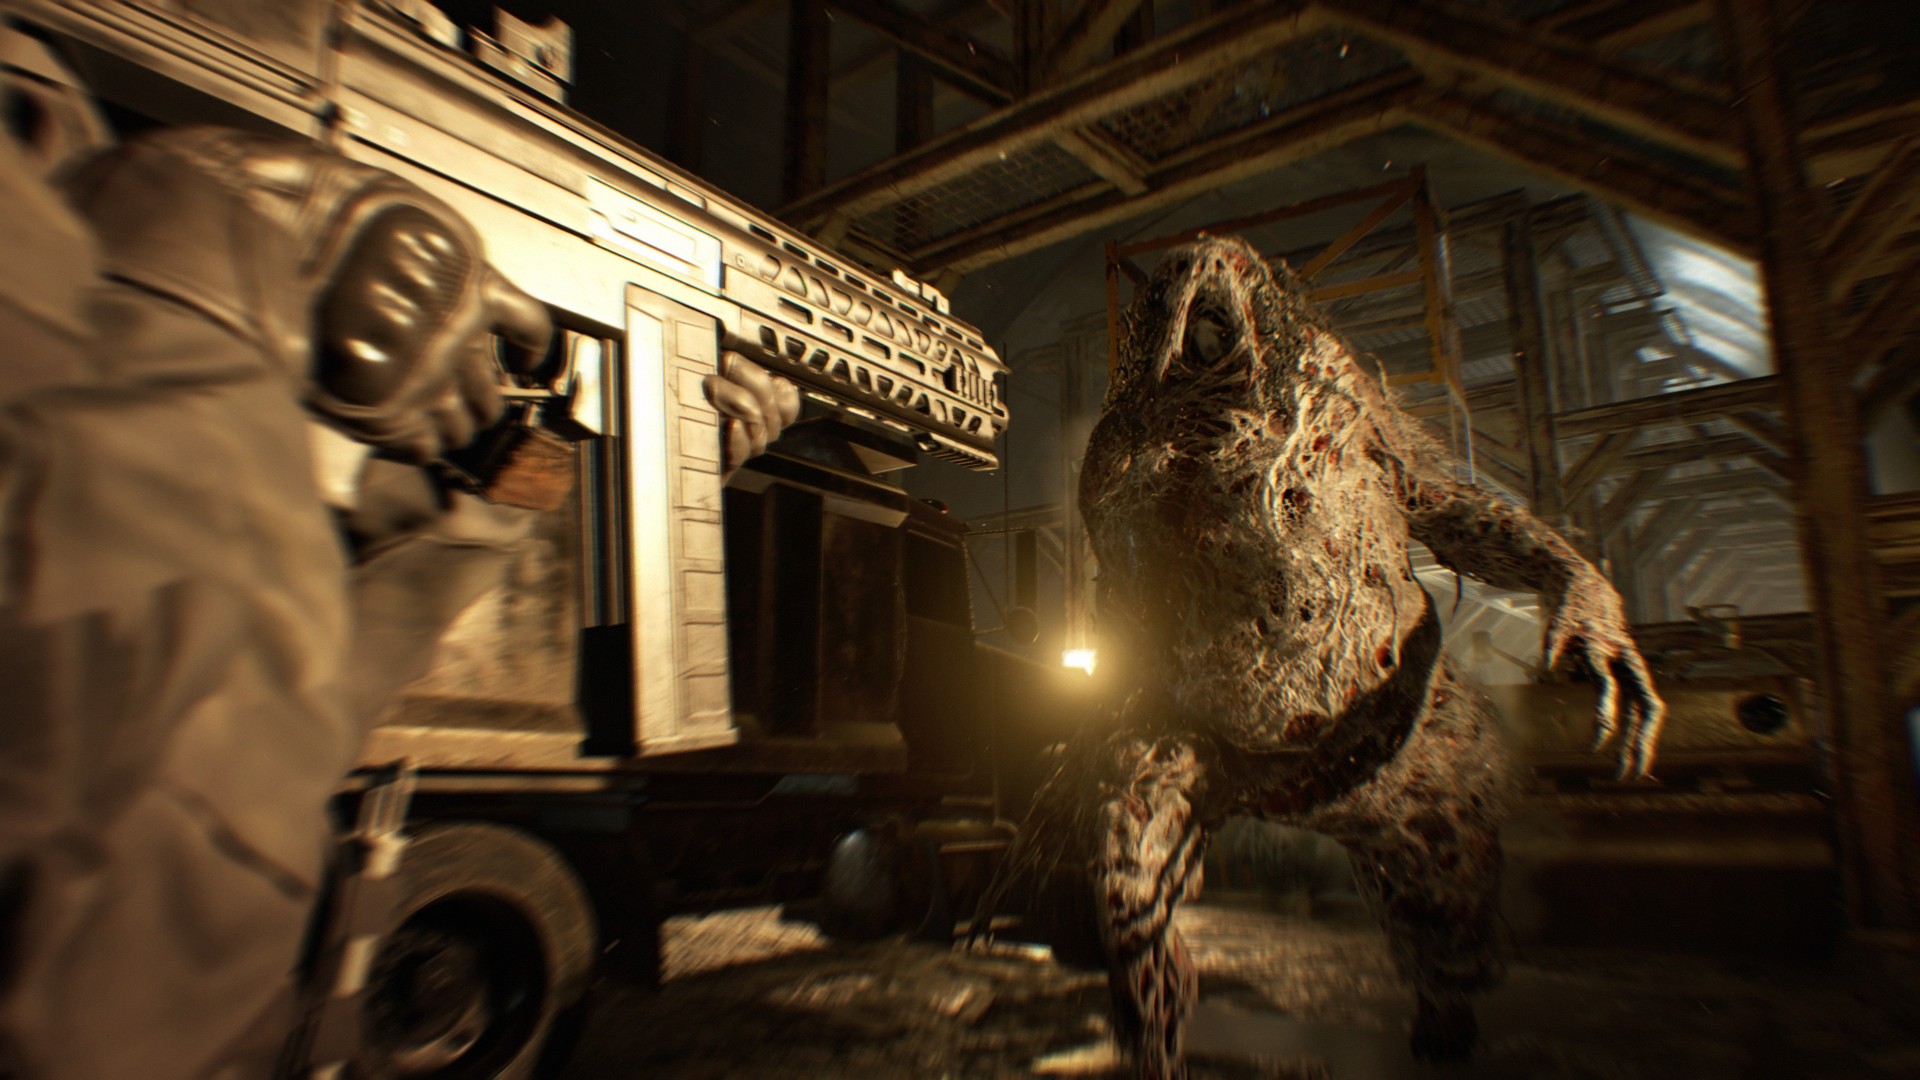 How are Resident Evil 7 and 8 connected?